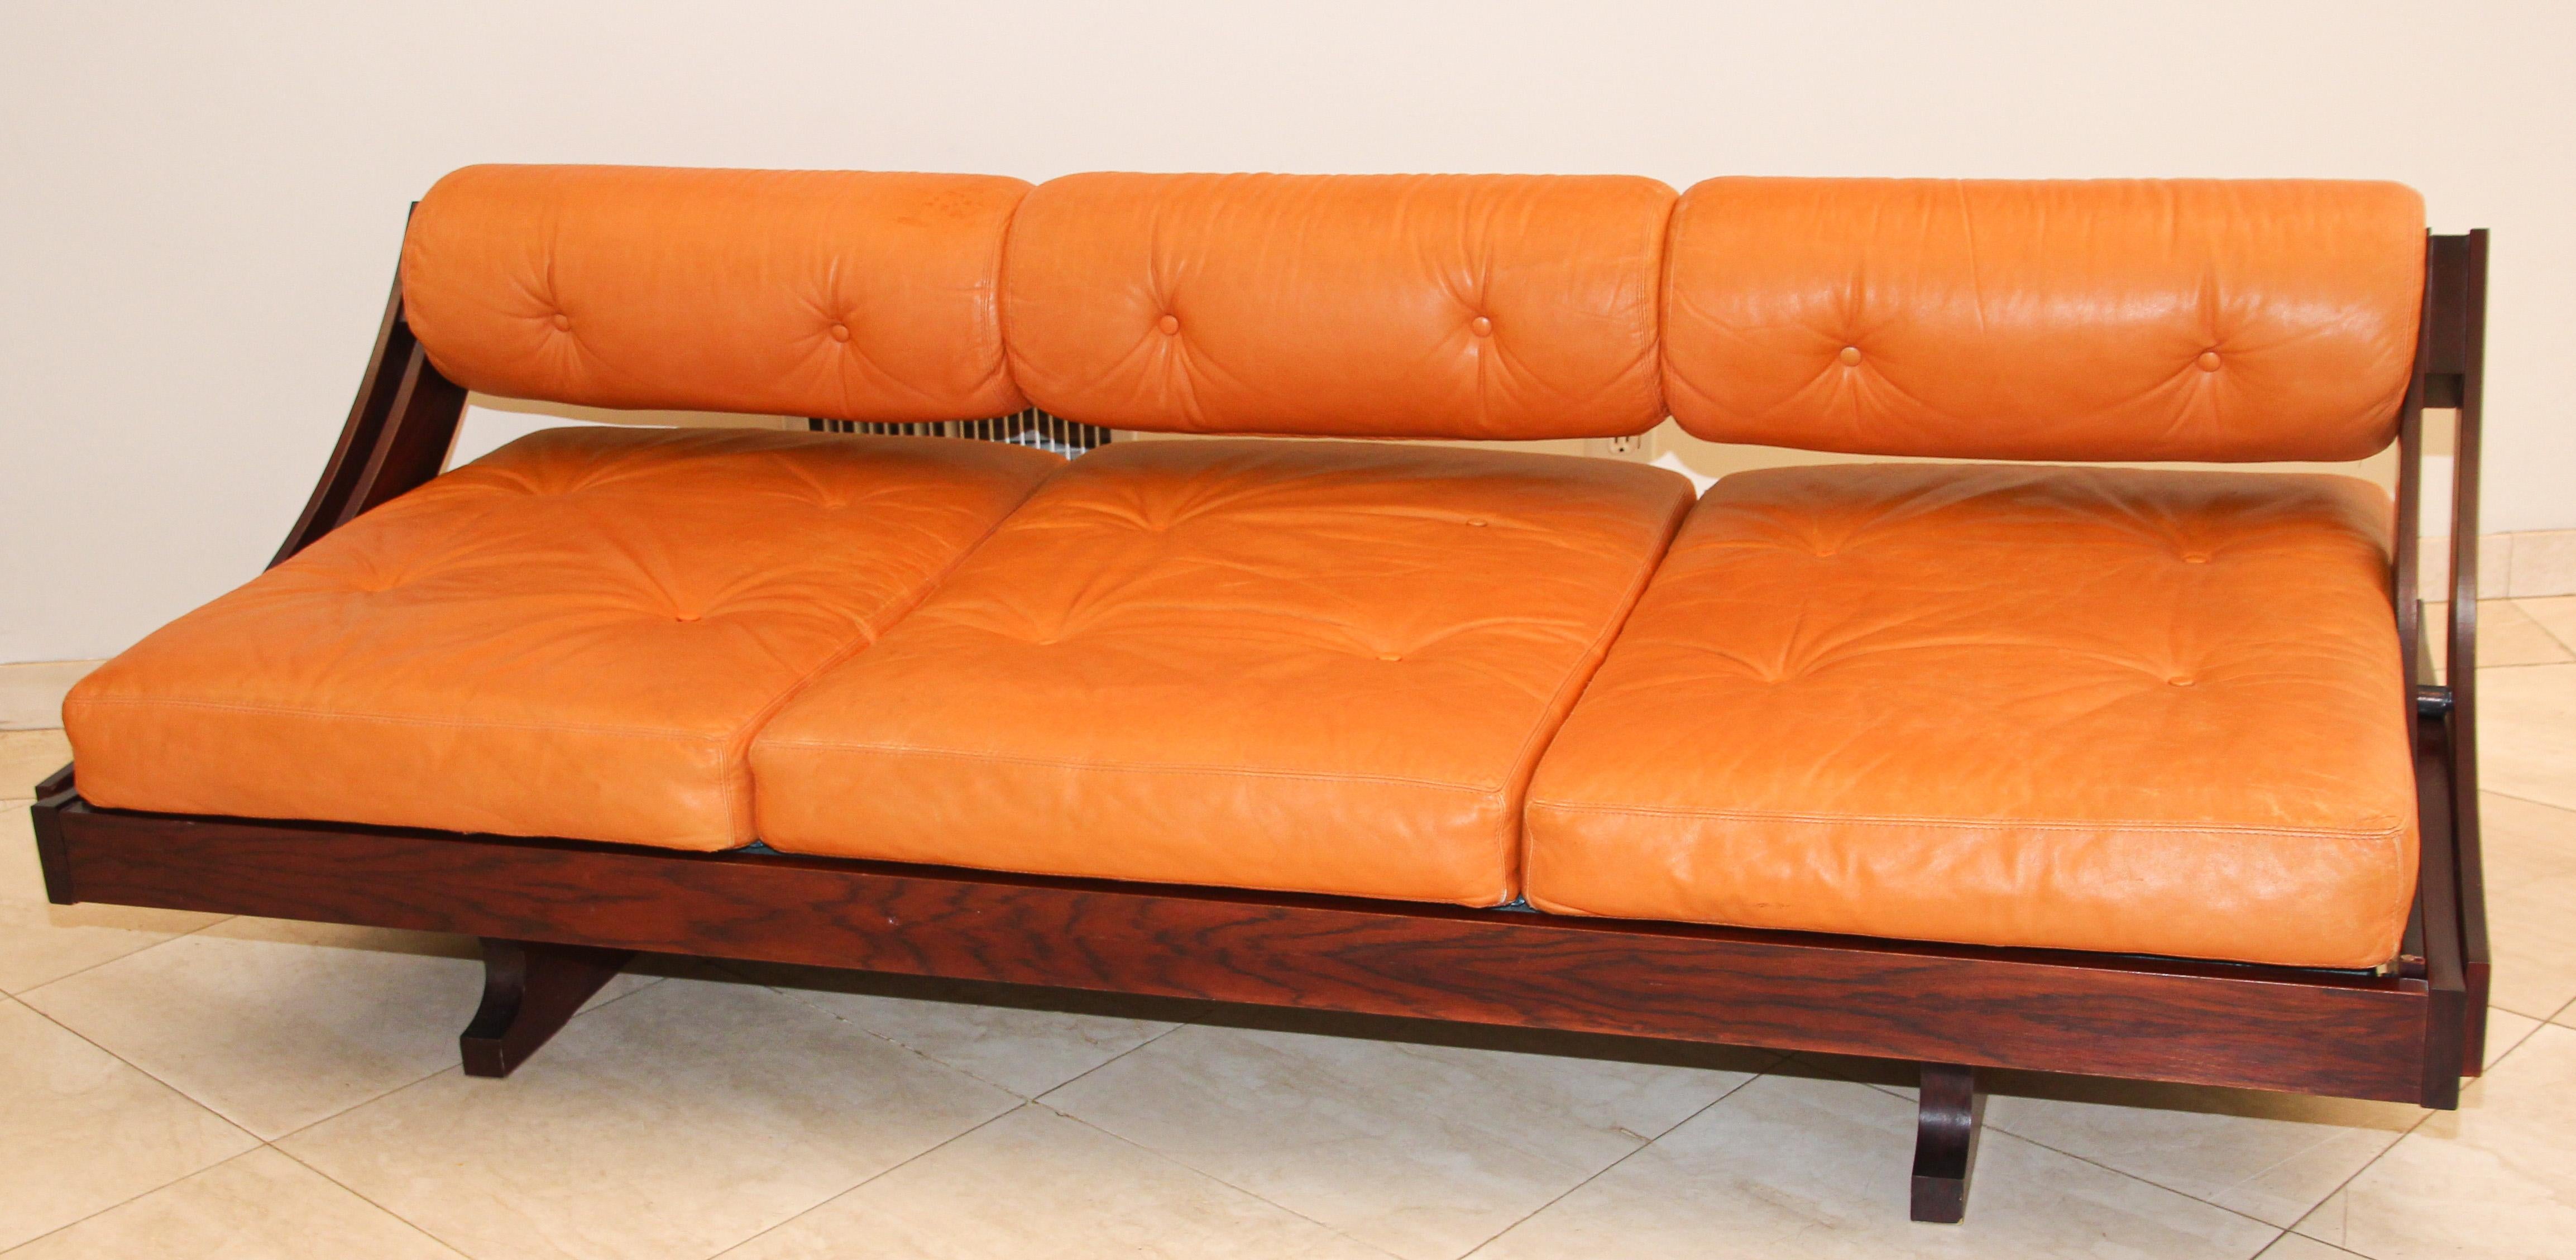 Gianni Songia Leather Daybed and Sofa for Sormani, Italy, 1963 For Sale 1